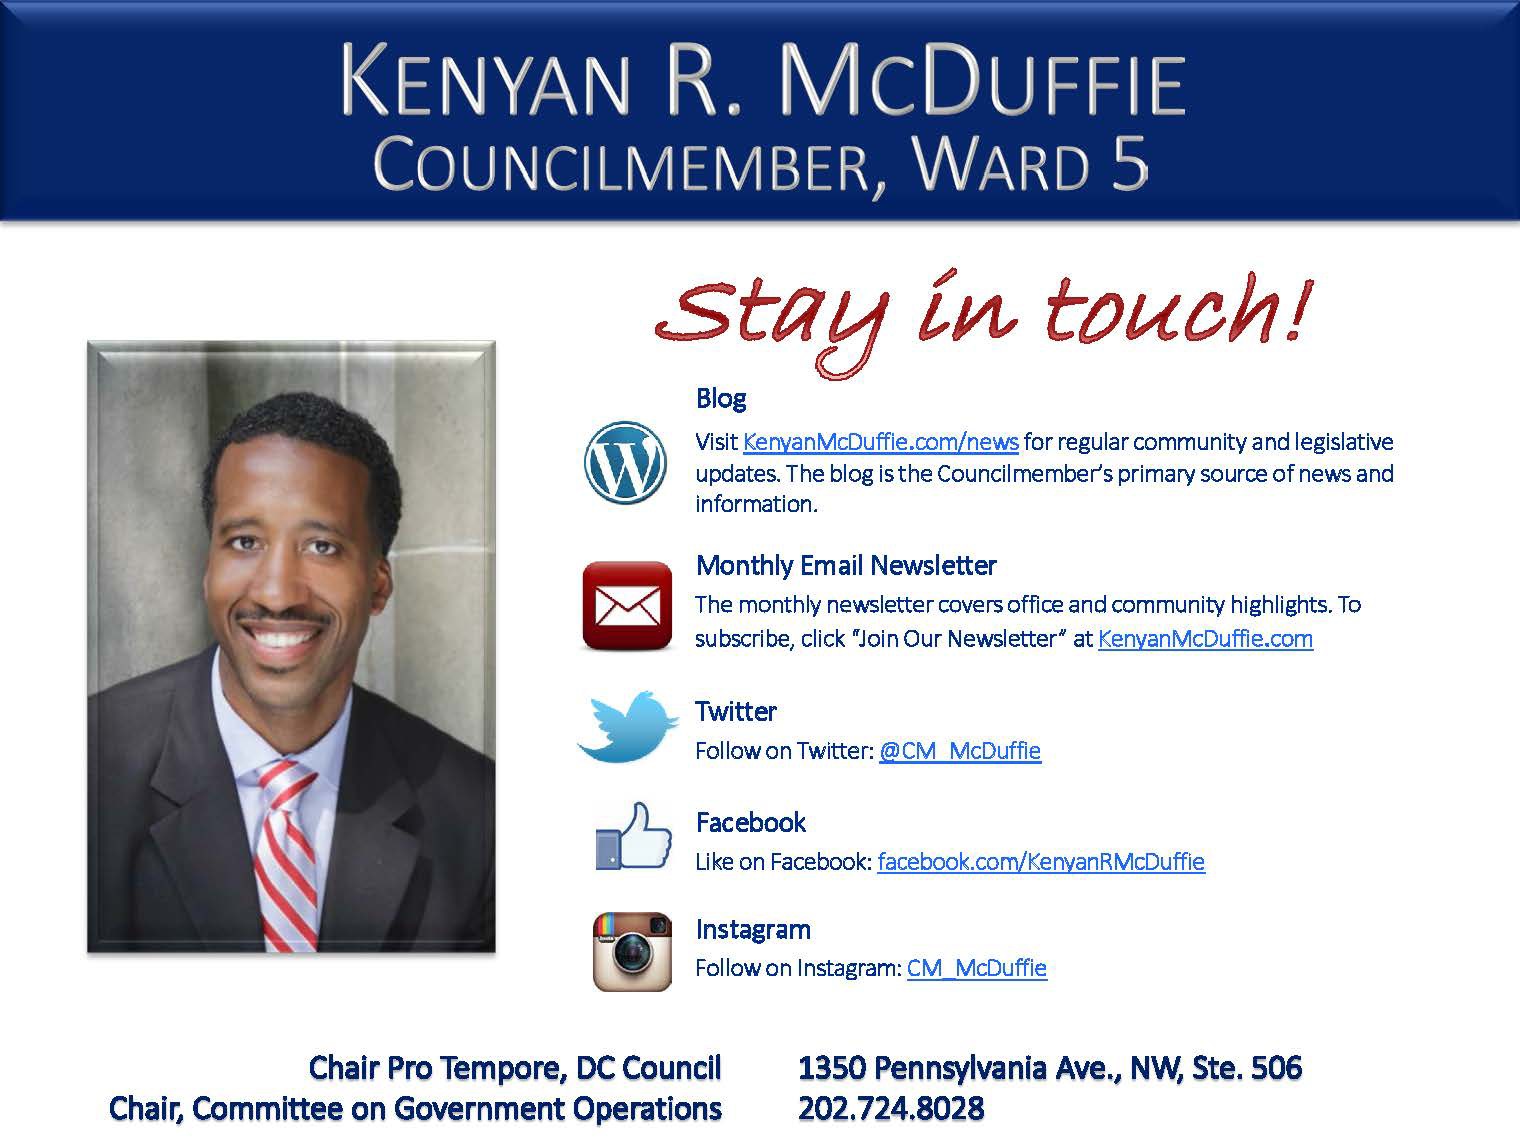 Stay in Touch with Councilmember Kenyan McDuffie